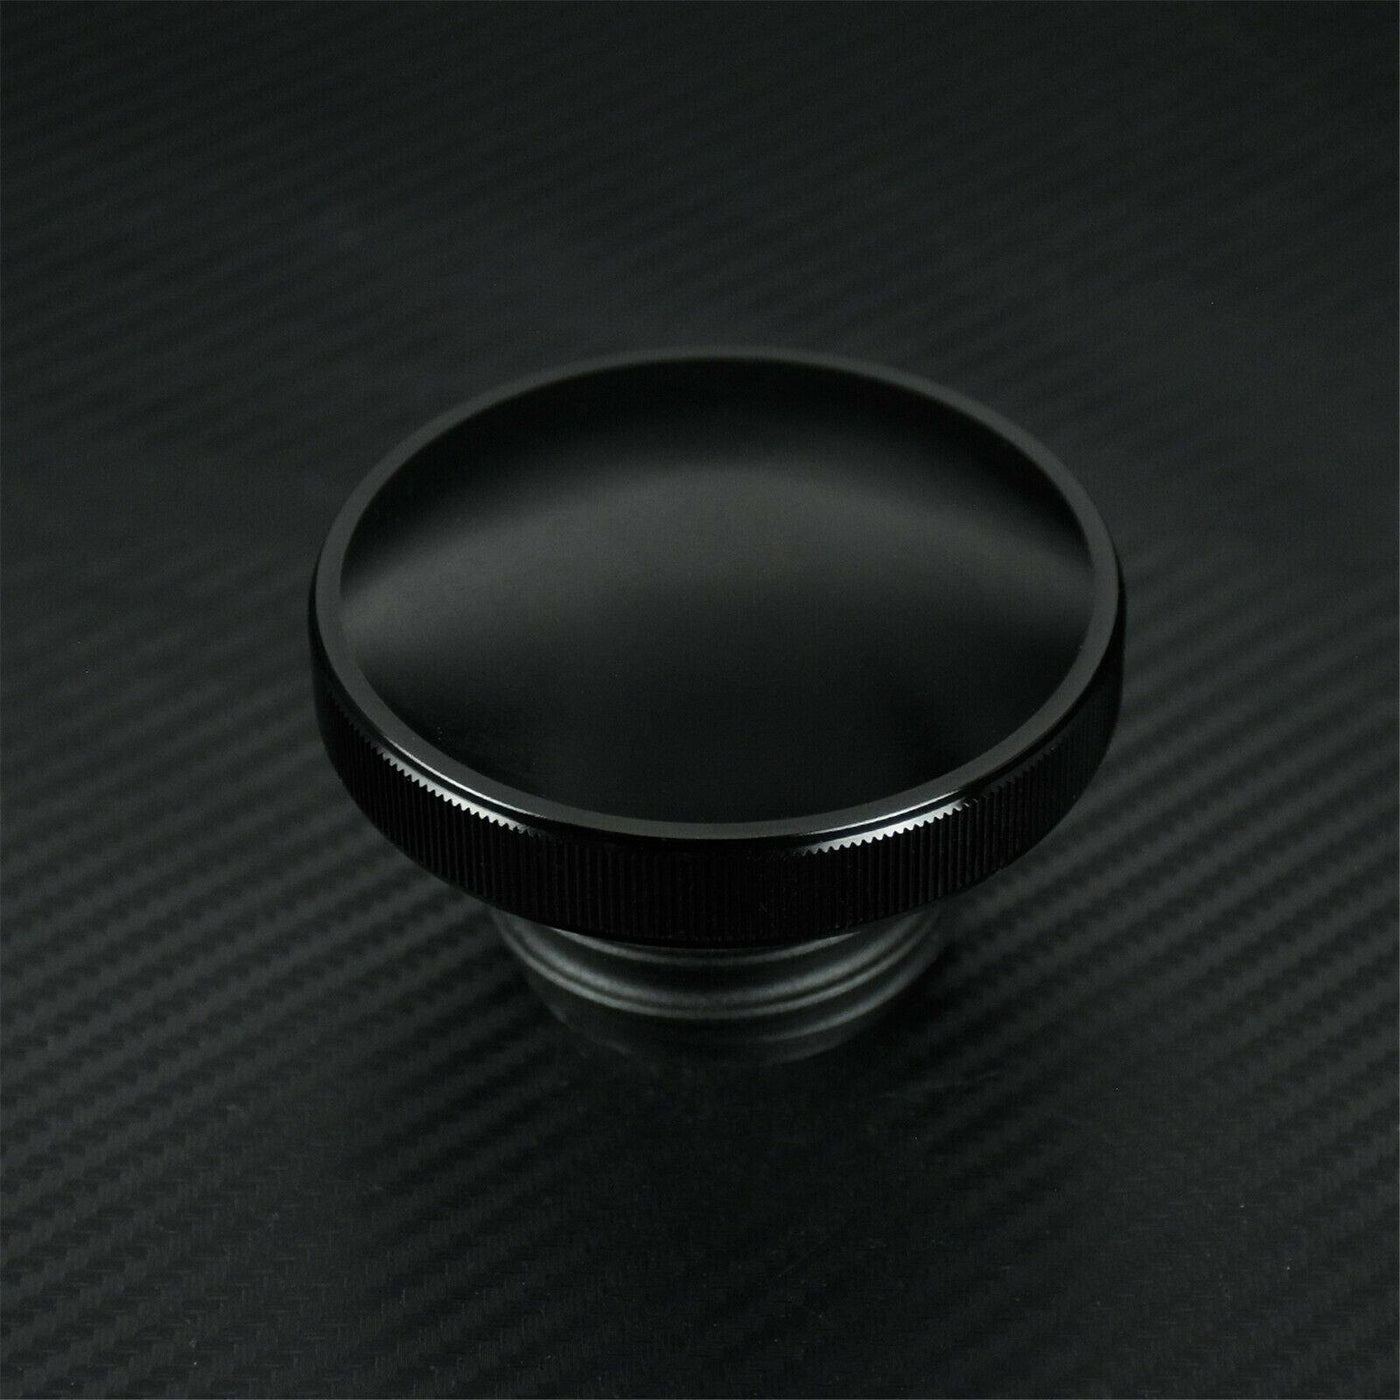 Vented Gas Cap Fuel Tank Right-hand Thread Smooth Black Fit For Harley Sportster - Moto Life Products